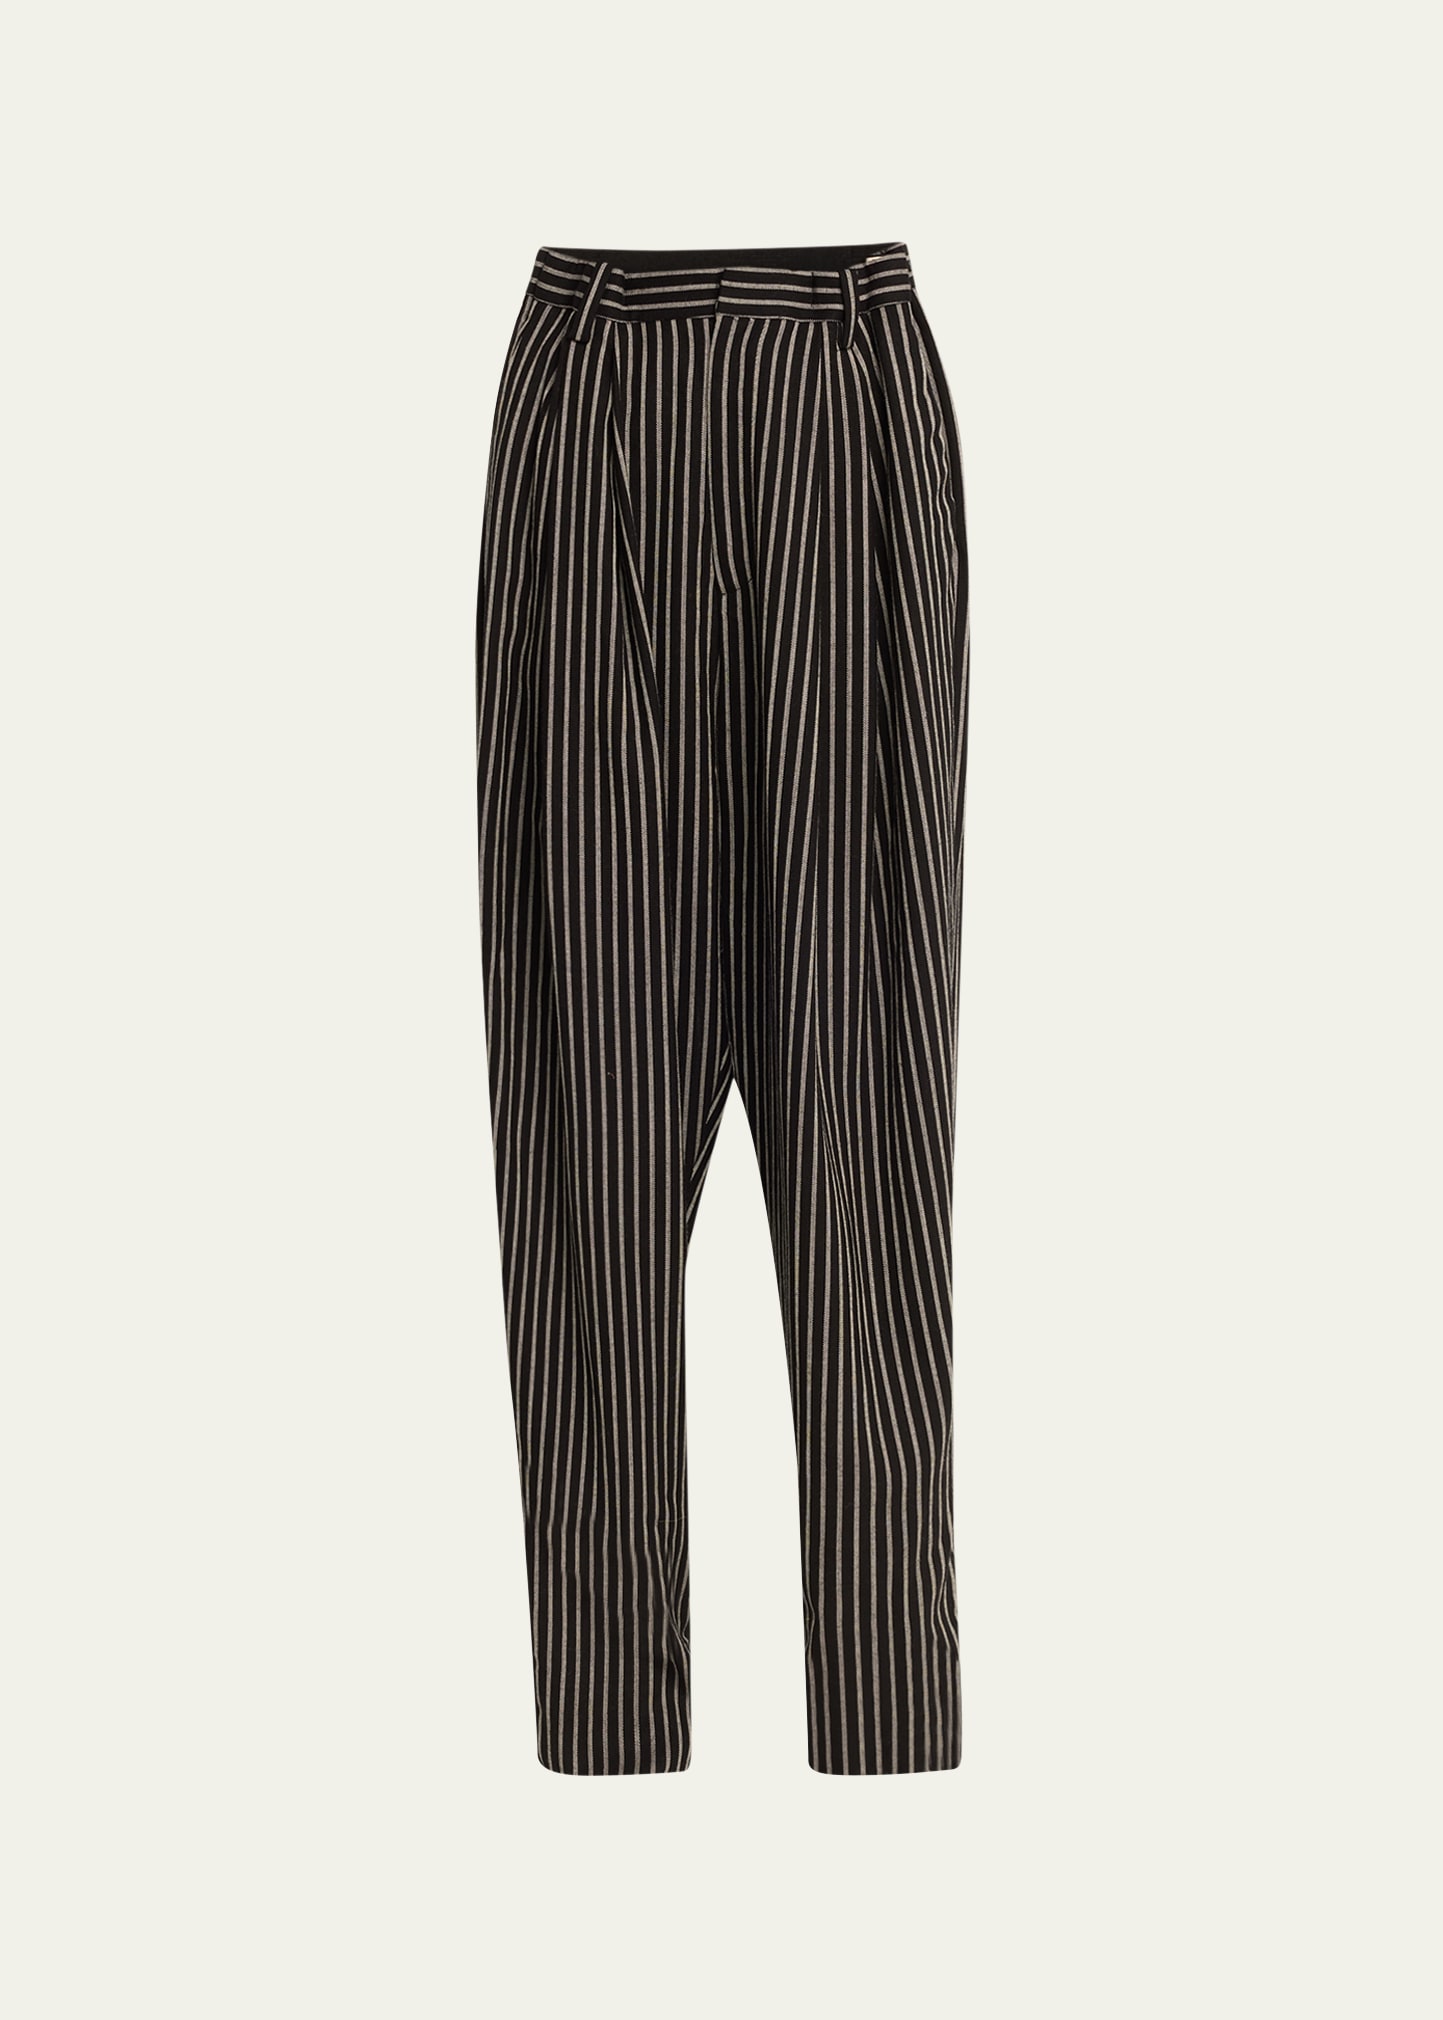 Striped Oversized Wool Trousers